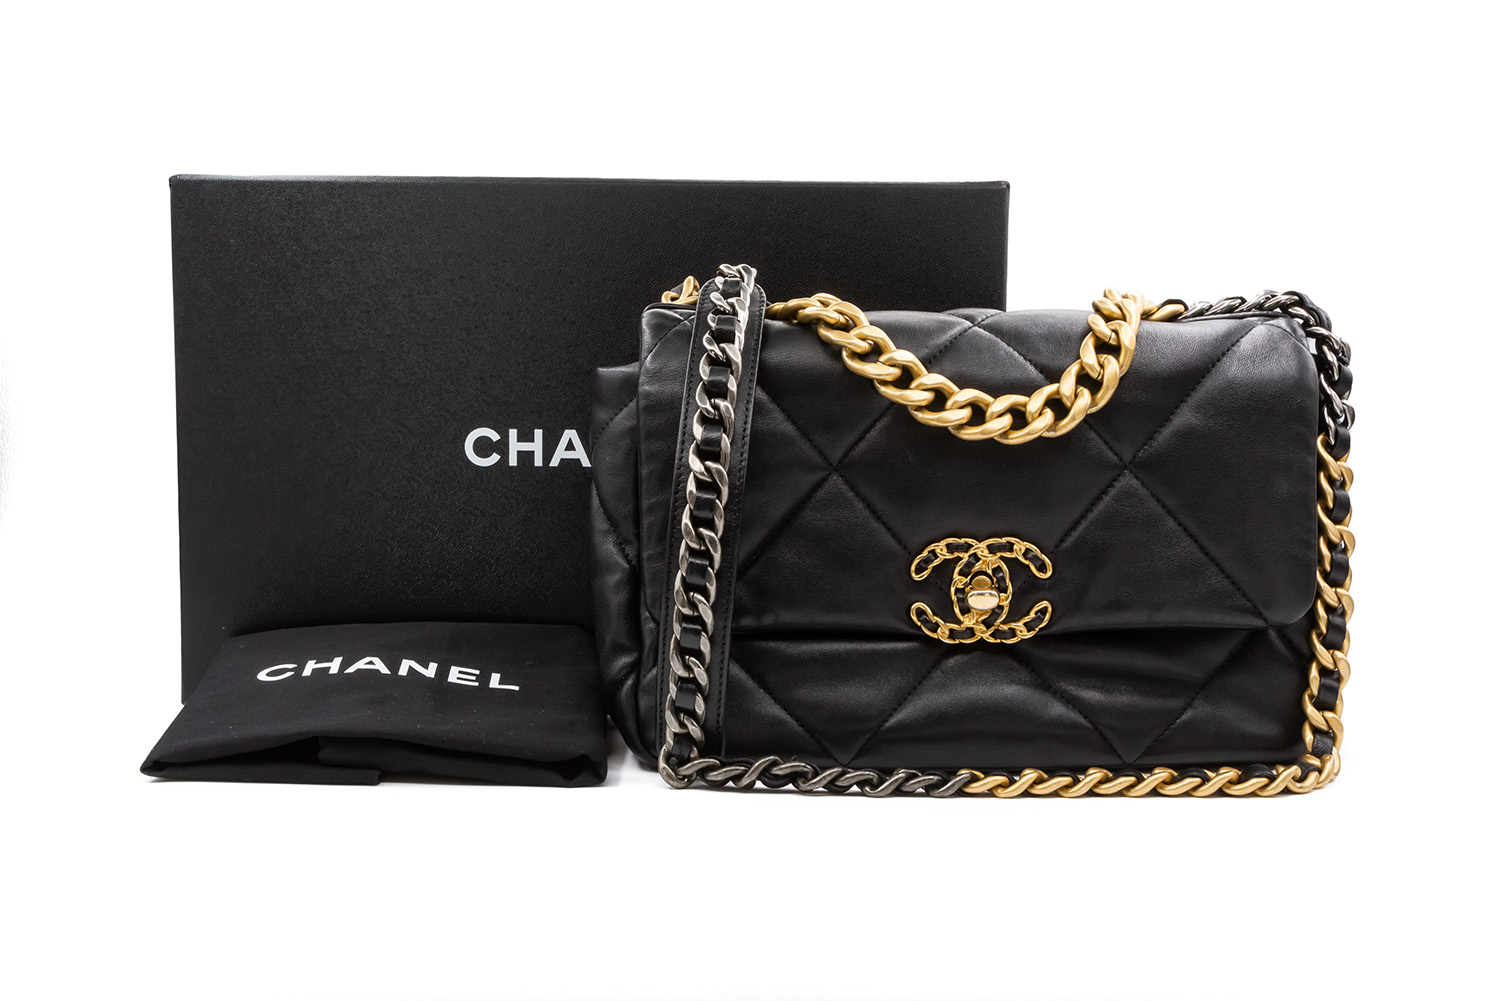 Chanel CHANEL 19 Shiny Lambskin Zip-Around Coin Purse with